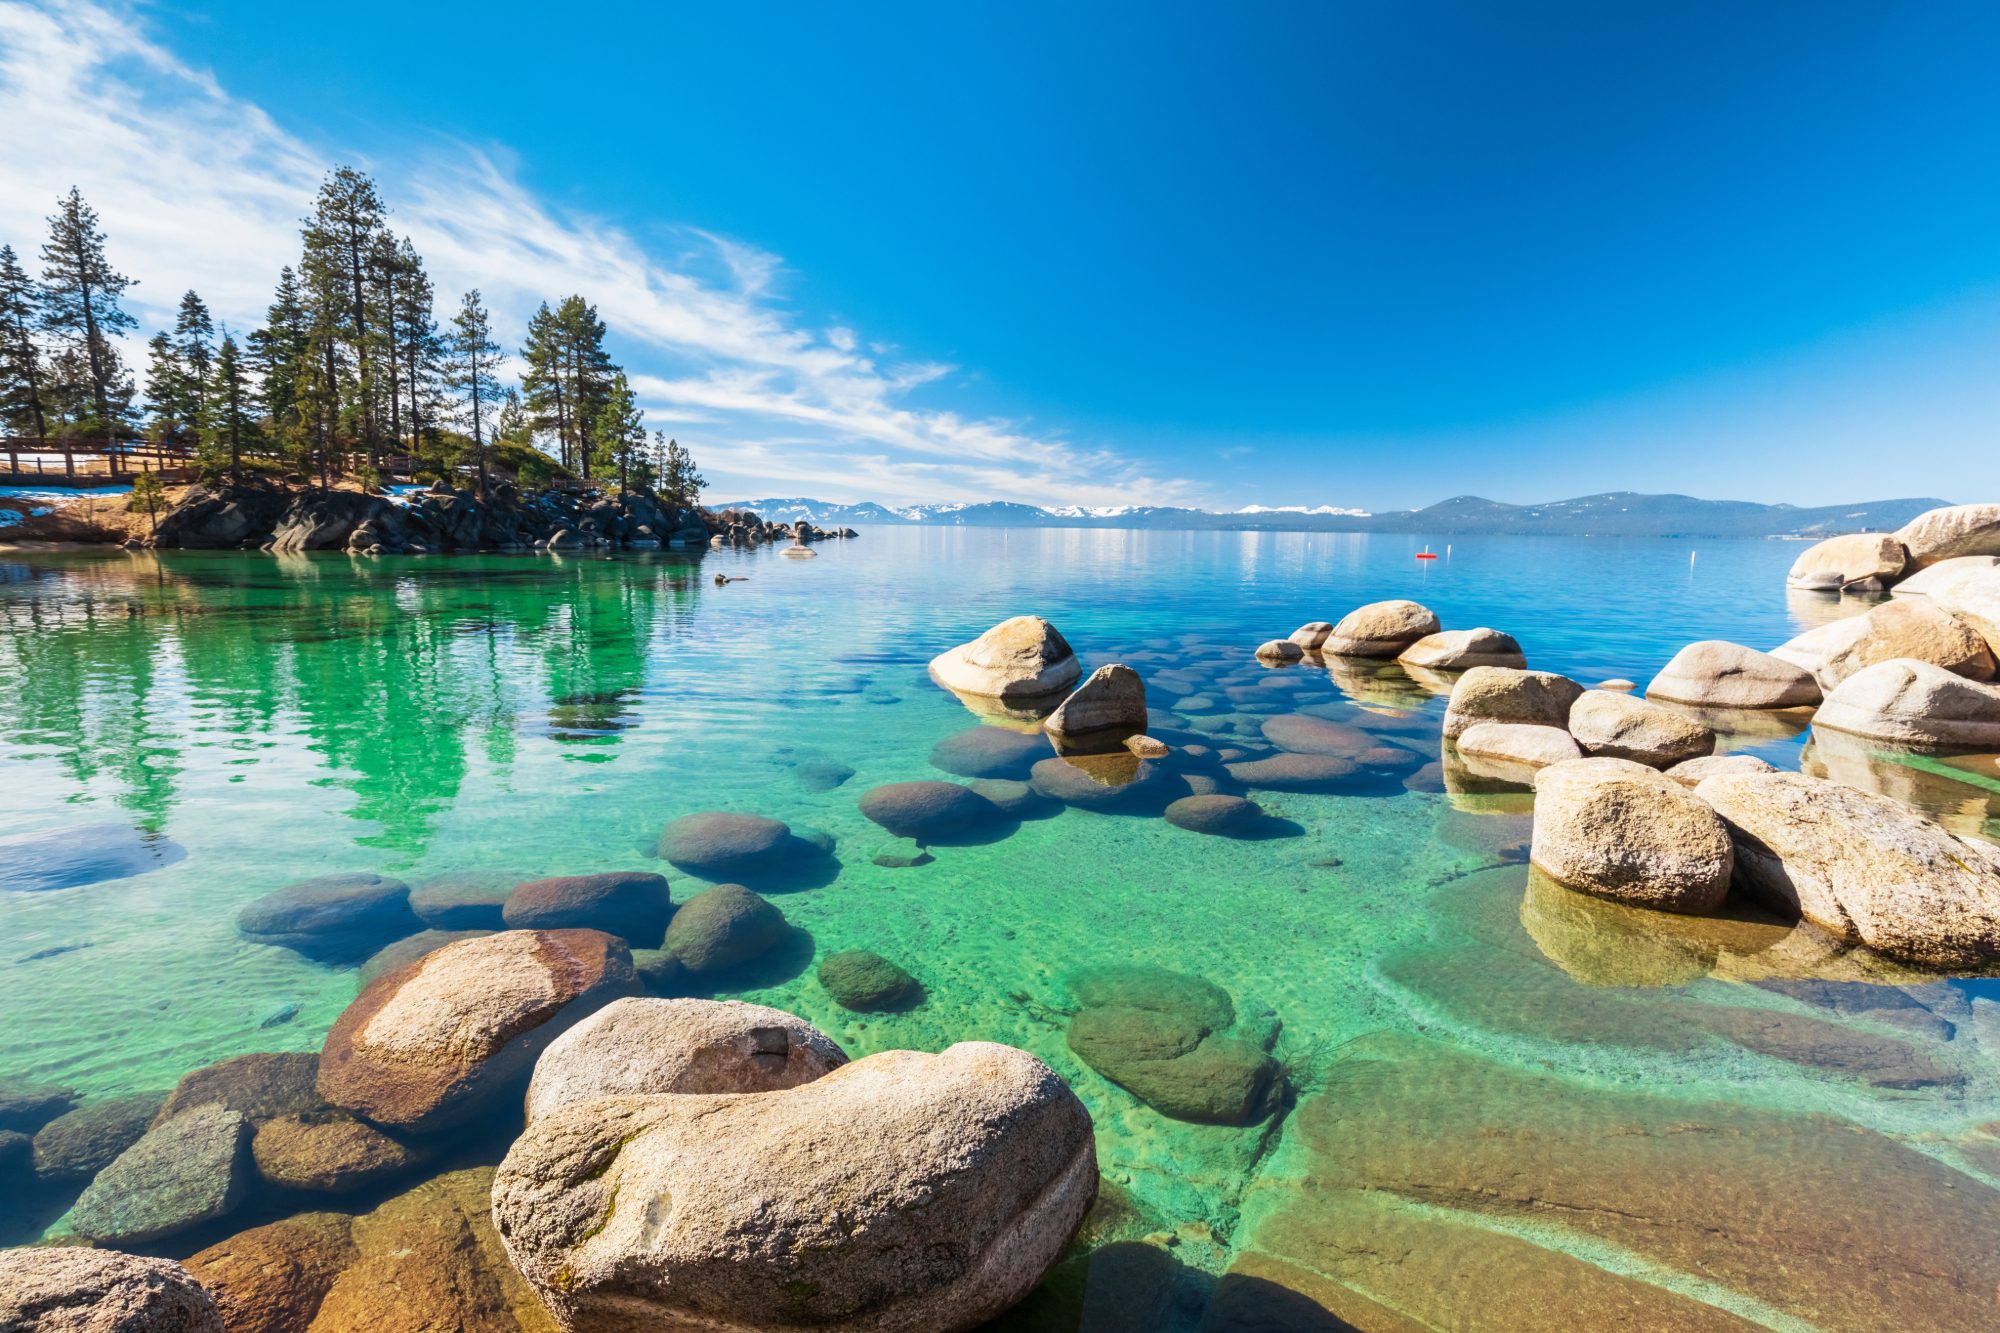 Shoreline of Lake Tahoe featuring crystal clea water, rocks, trees, and mountains far in the background